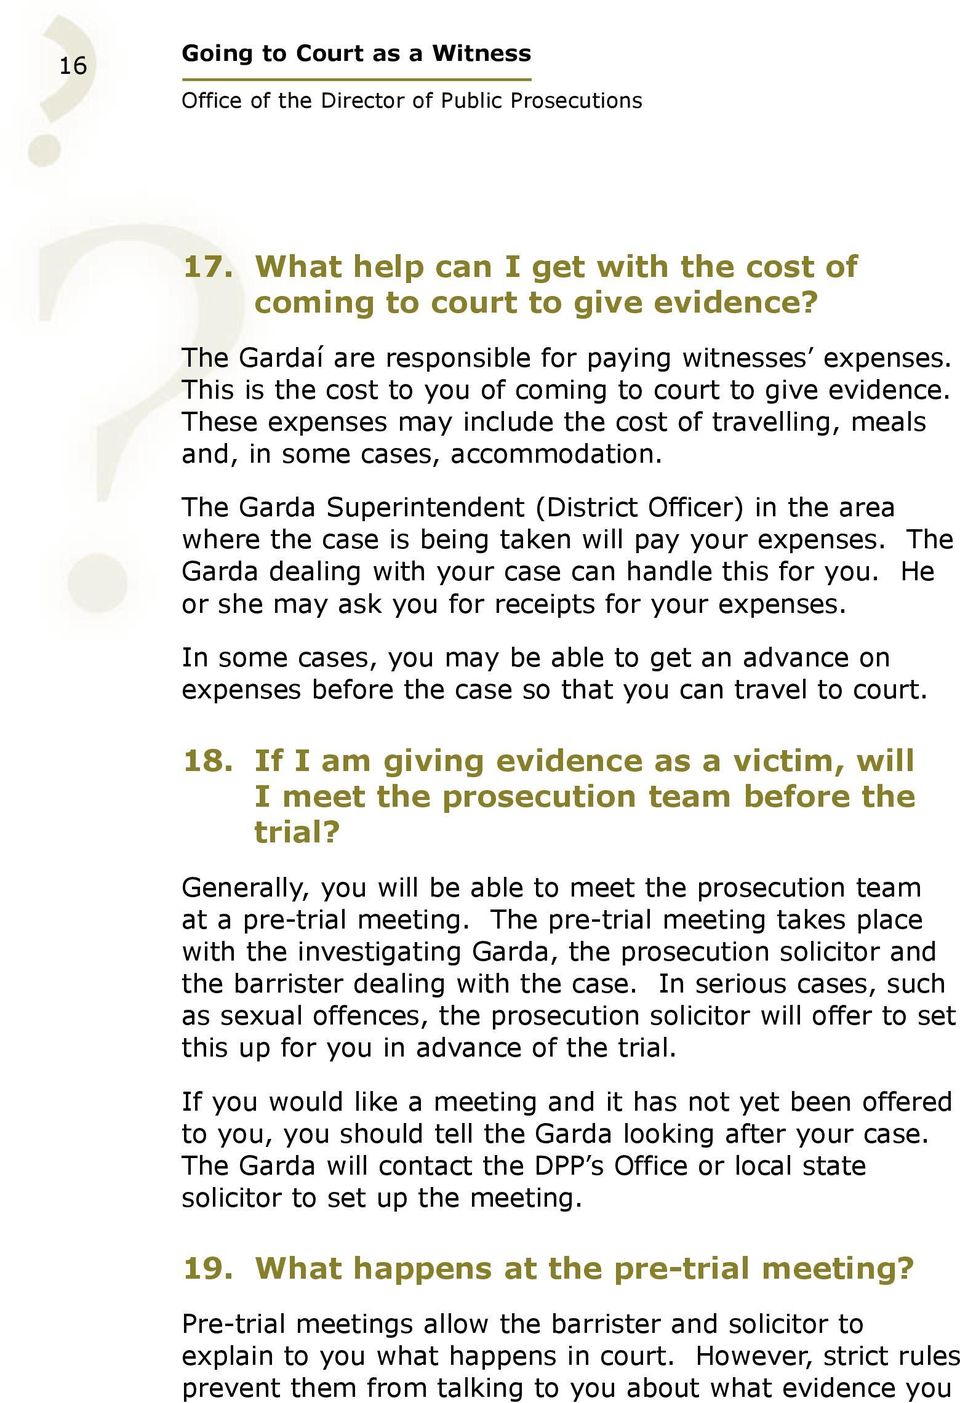 The Garda Superintendent (District Officer) in the area where the case is being taken will pay your expenses. The Garda dealing with your case can handle this for you.